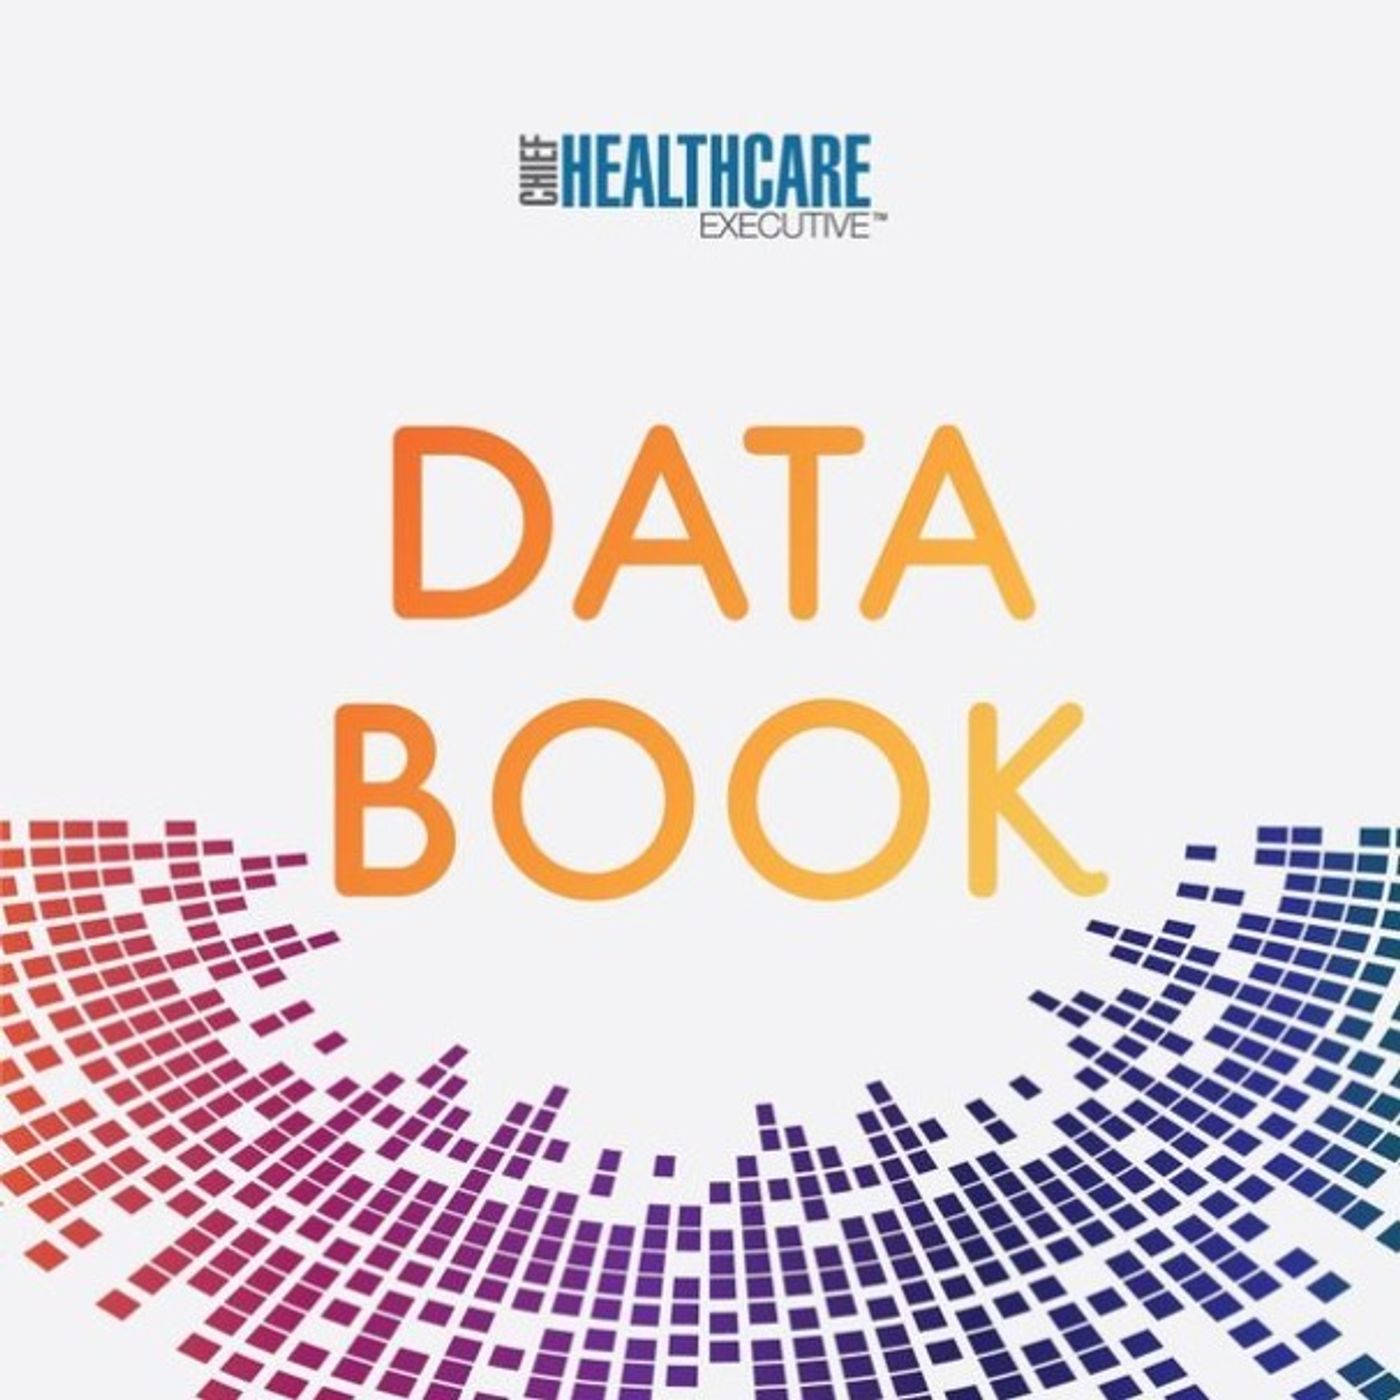 S7 Ep17: Data Book: WellSky's Lissy Hu talks about post-acute care trends and technology